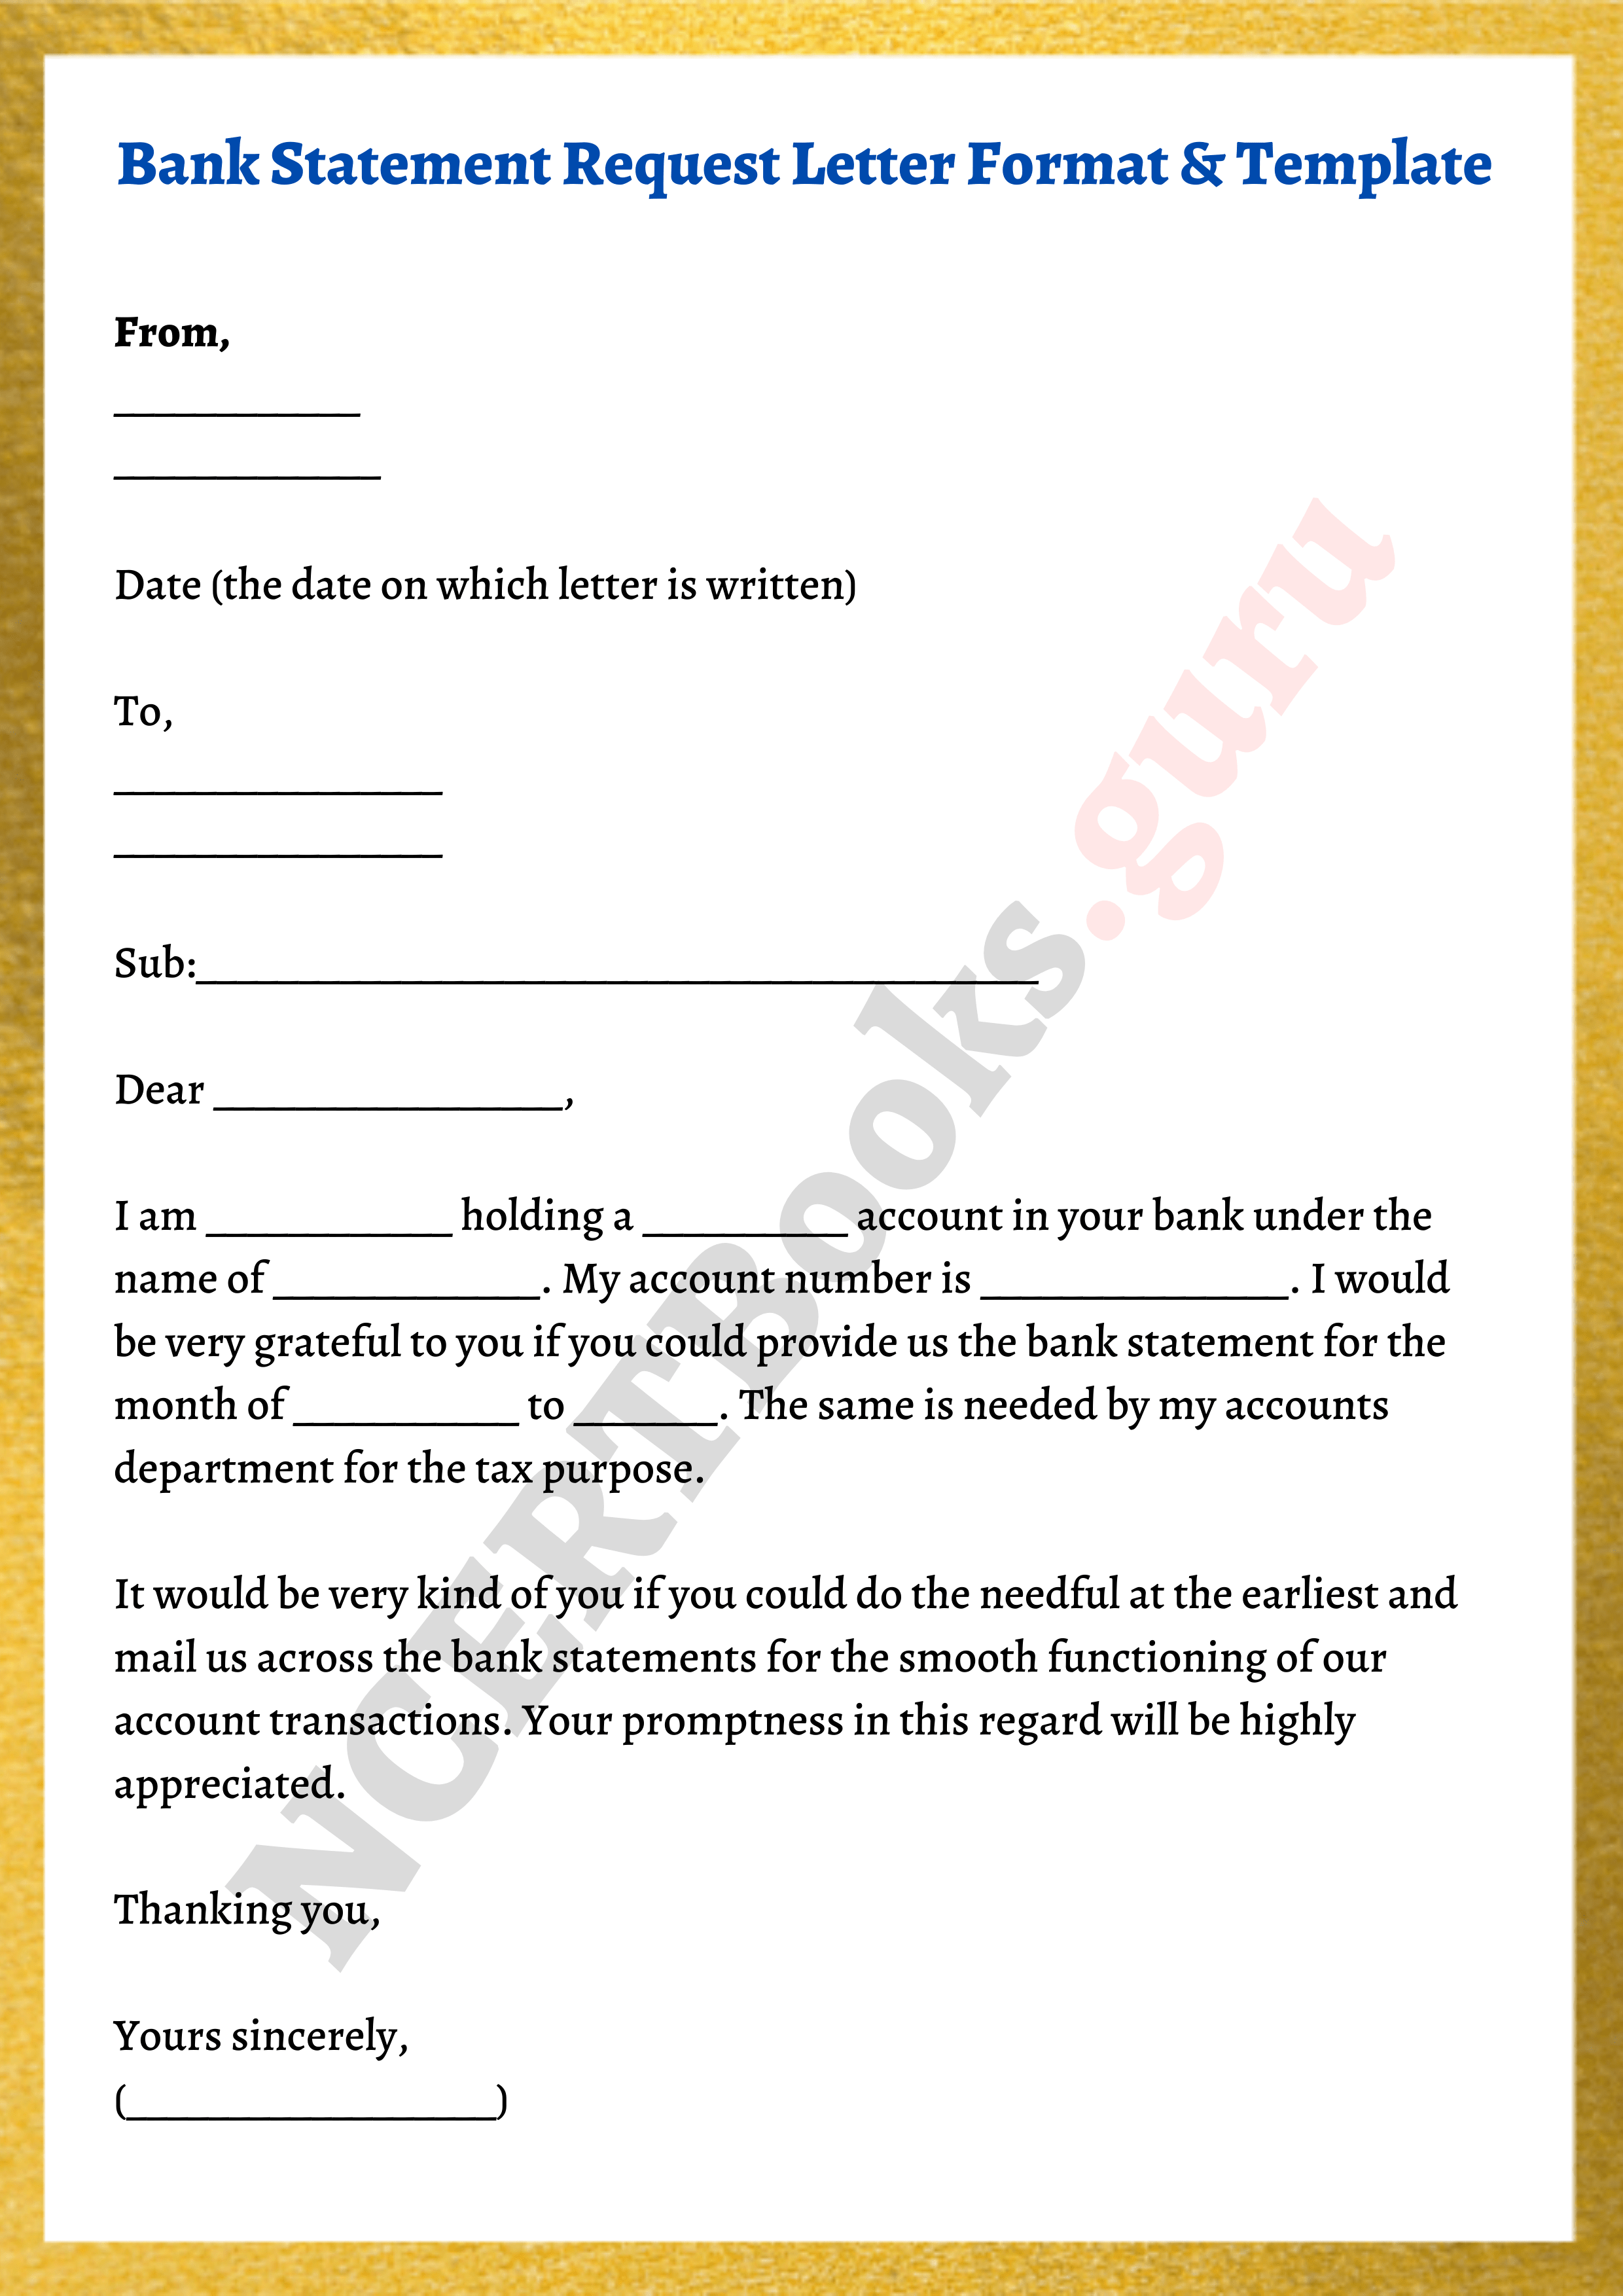 Bank Statement Request Letter Template, Format, Samples & Writing Tips